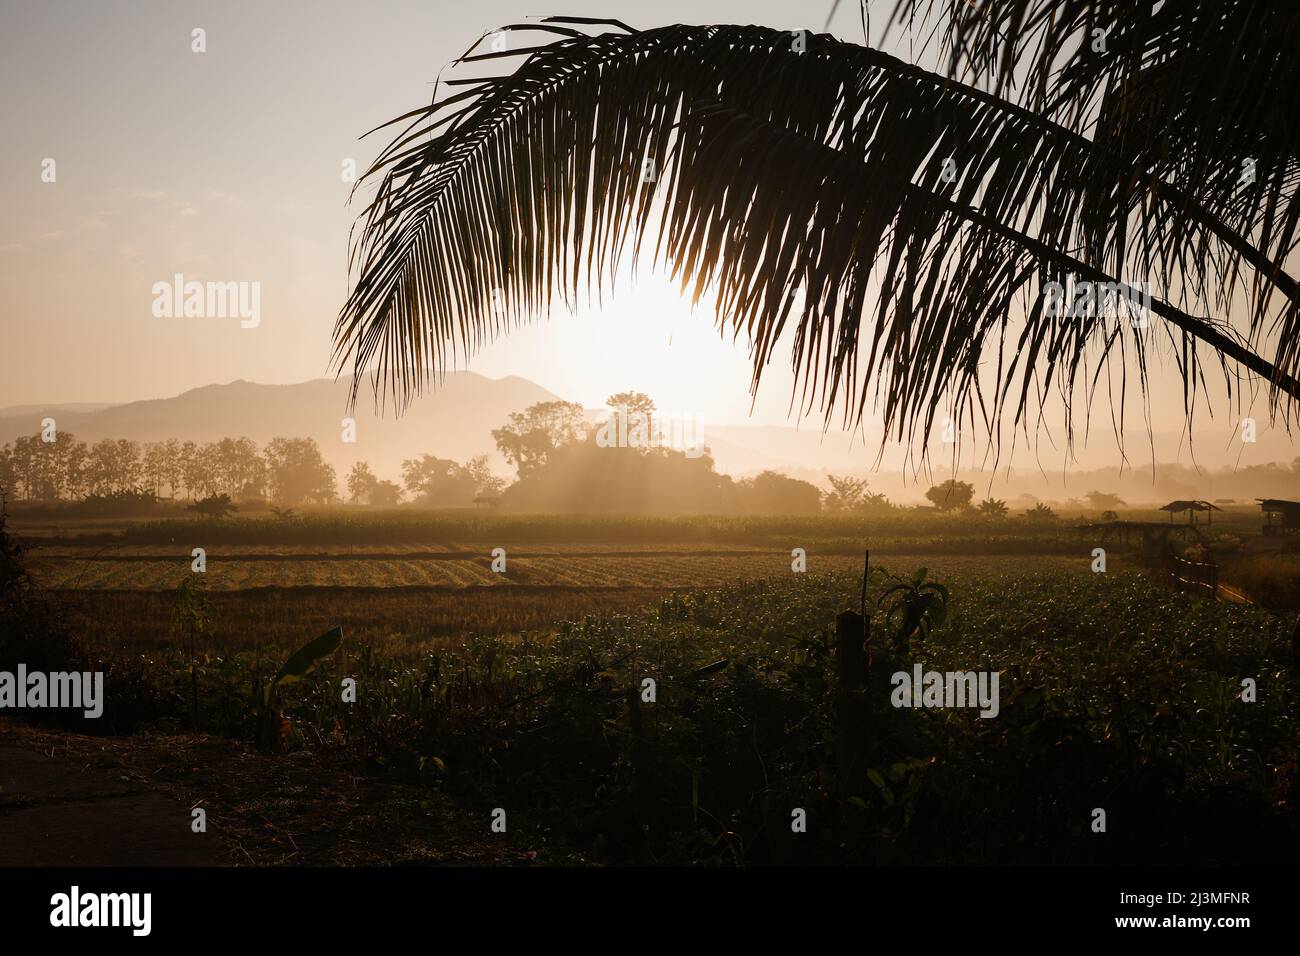 Close focus on foreground of coconut branches and leaves with background of rice field and trees, the golden light from sunrise shining over hazy moun Stock Photo